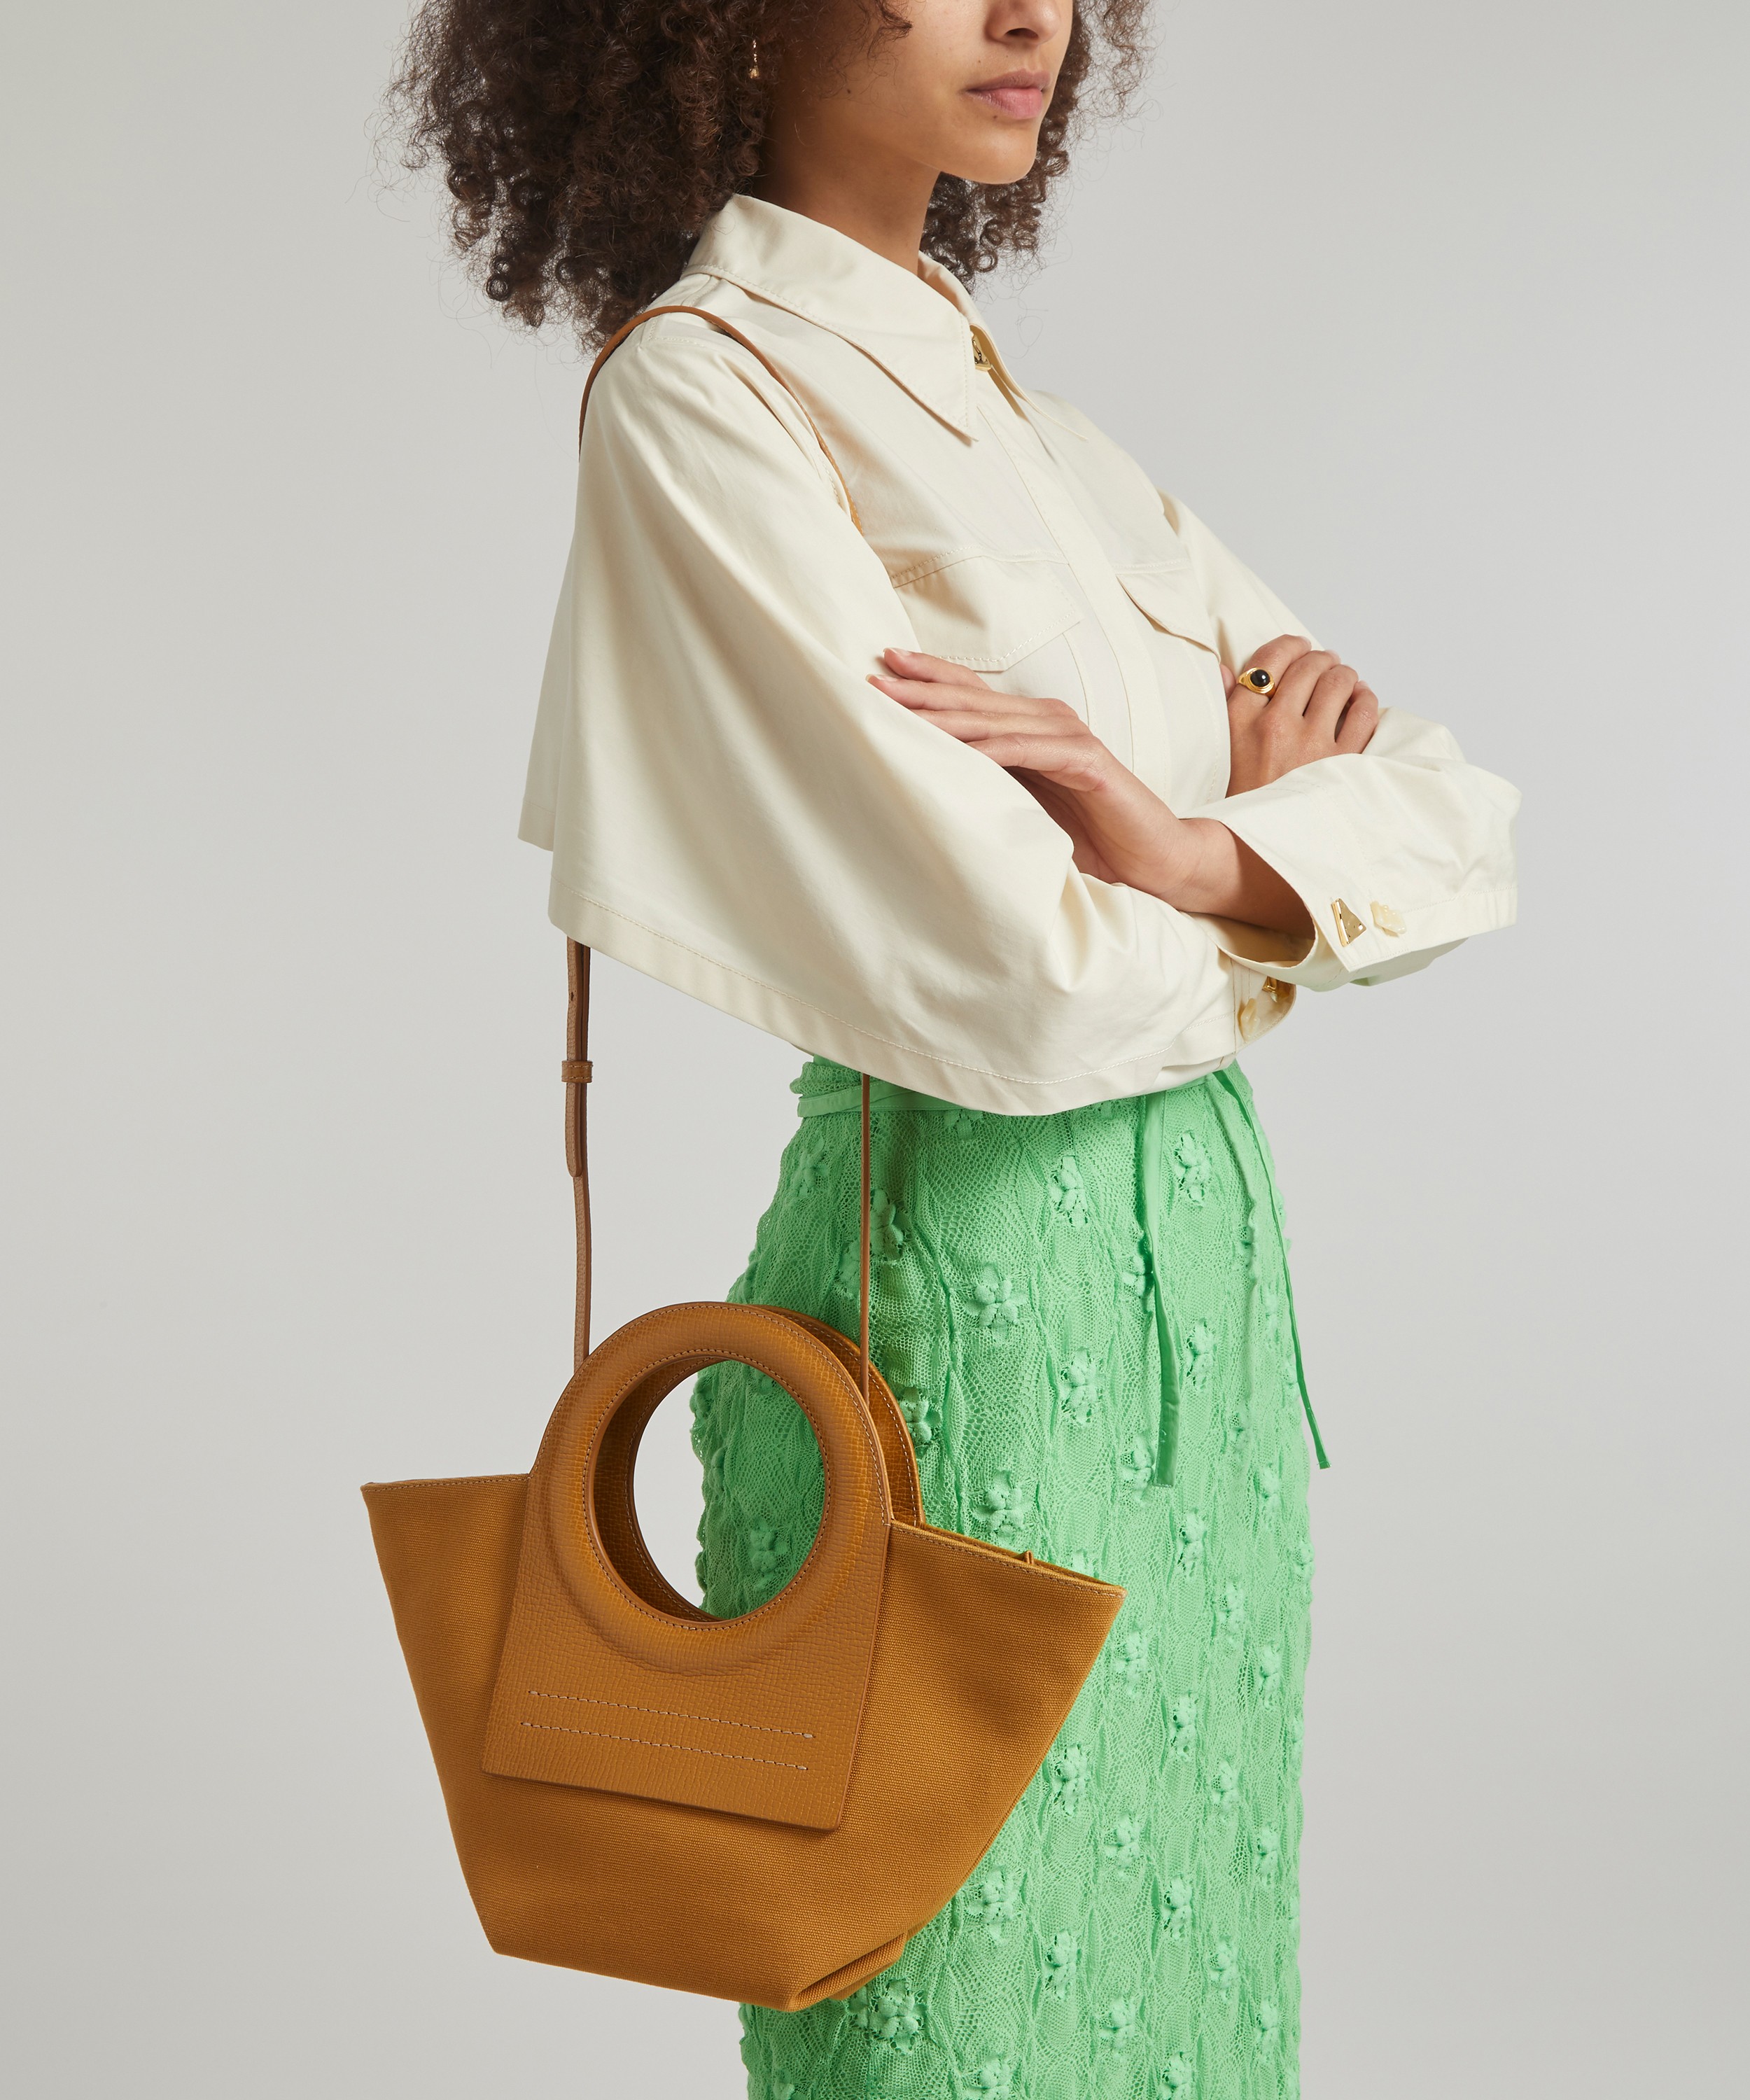 Hereu - Beige and Brown Chestnut Leather and Canvas Cala Tote Bag